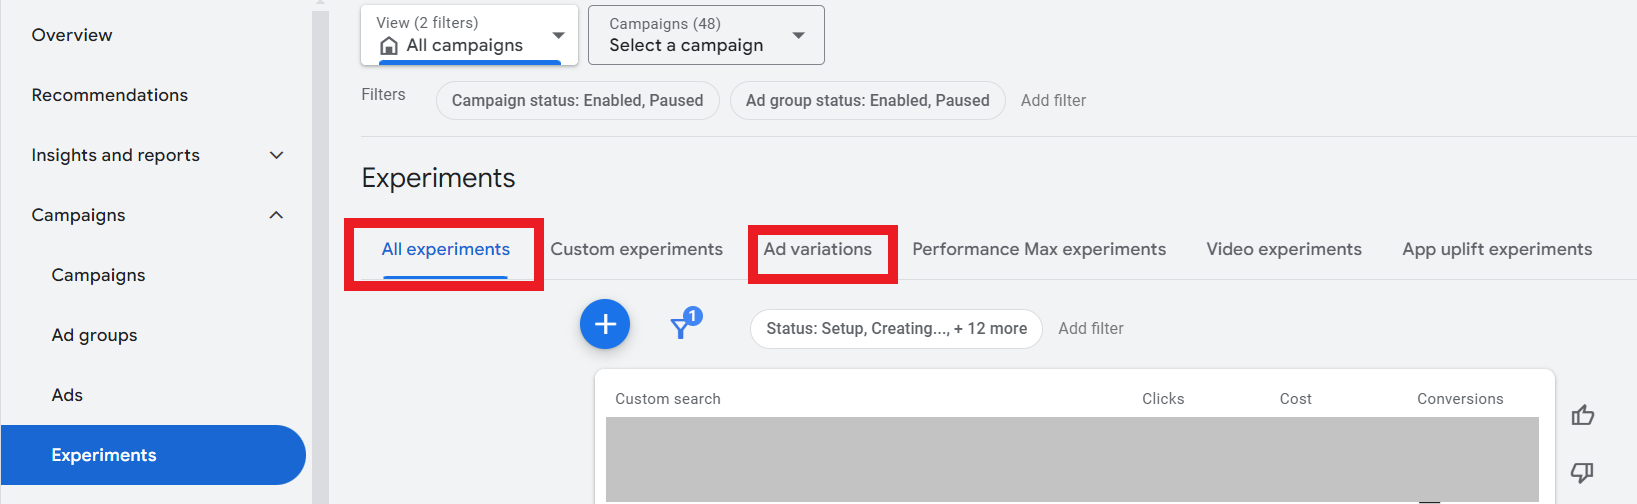 Where to find experiments and ad variations in Google Ads.